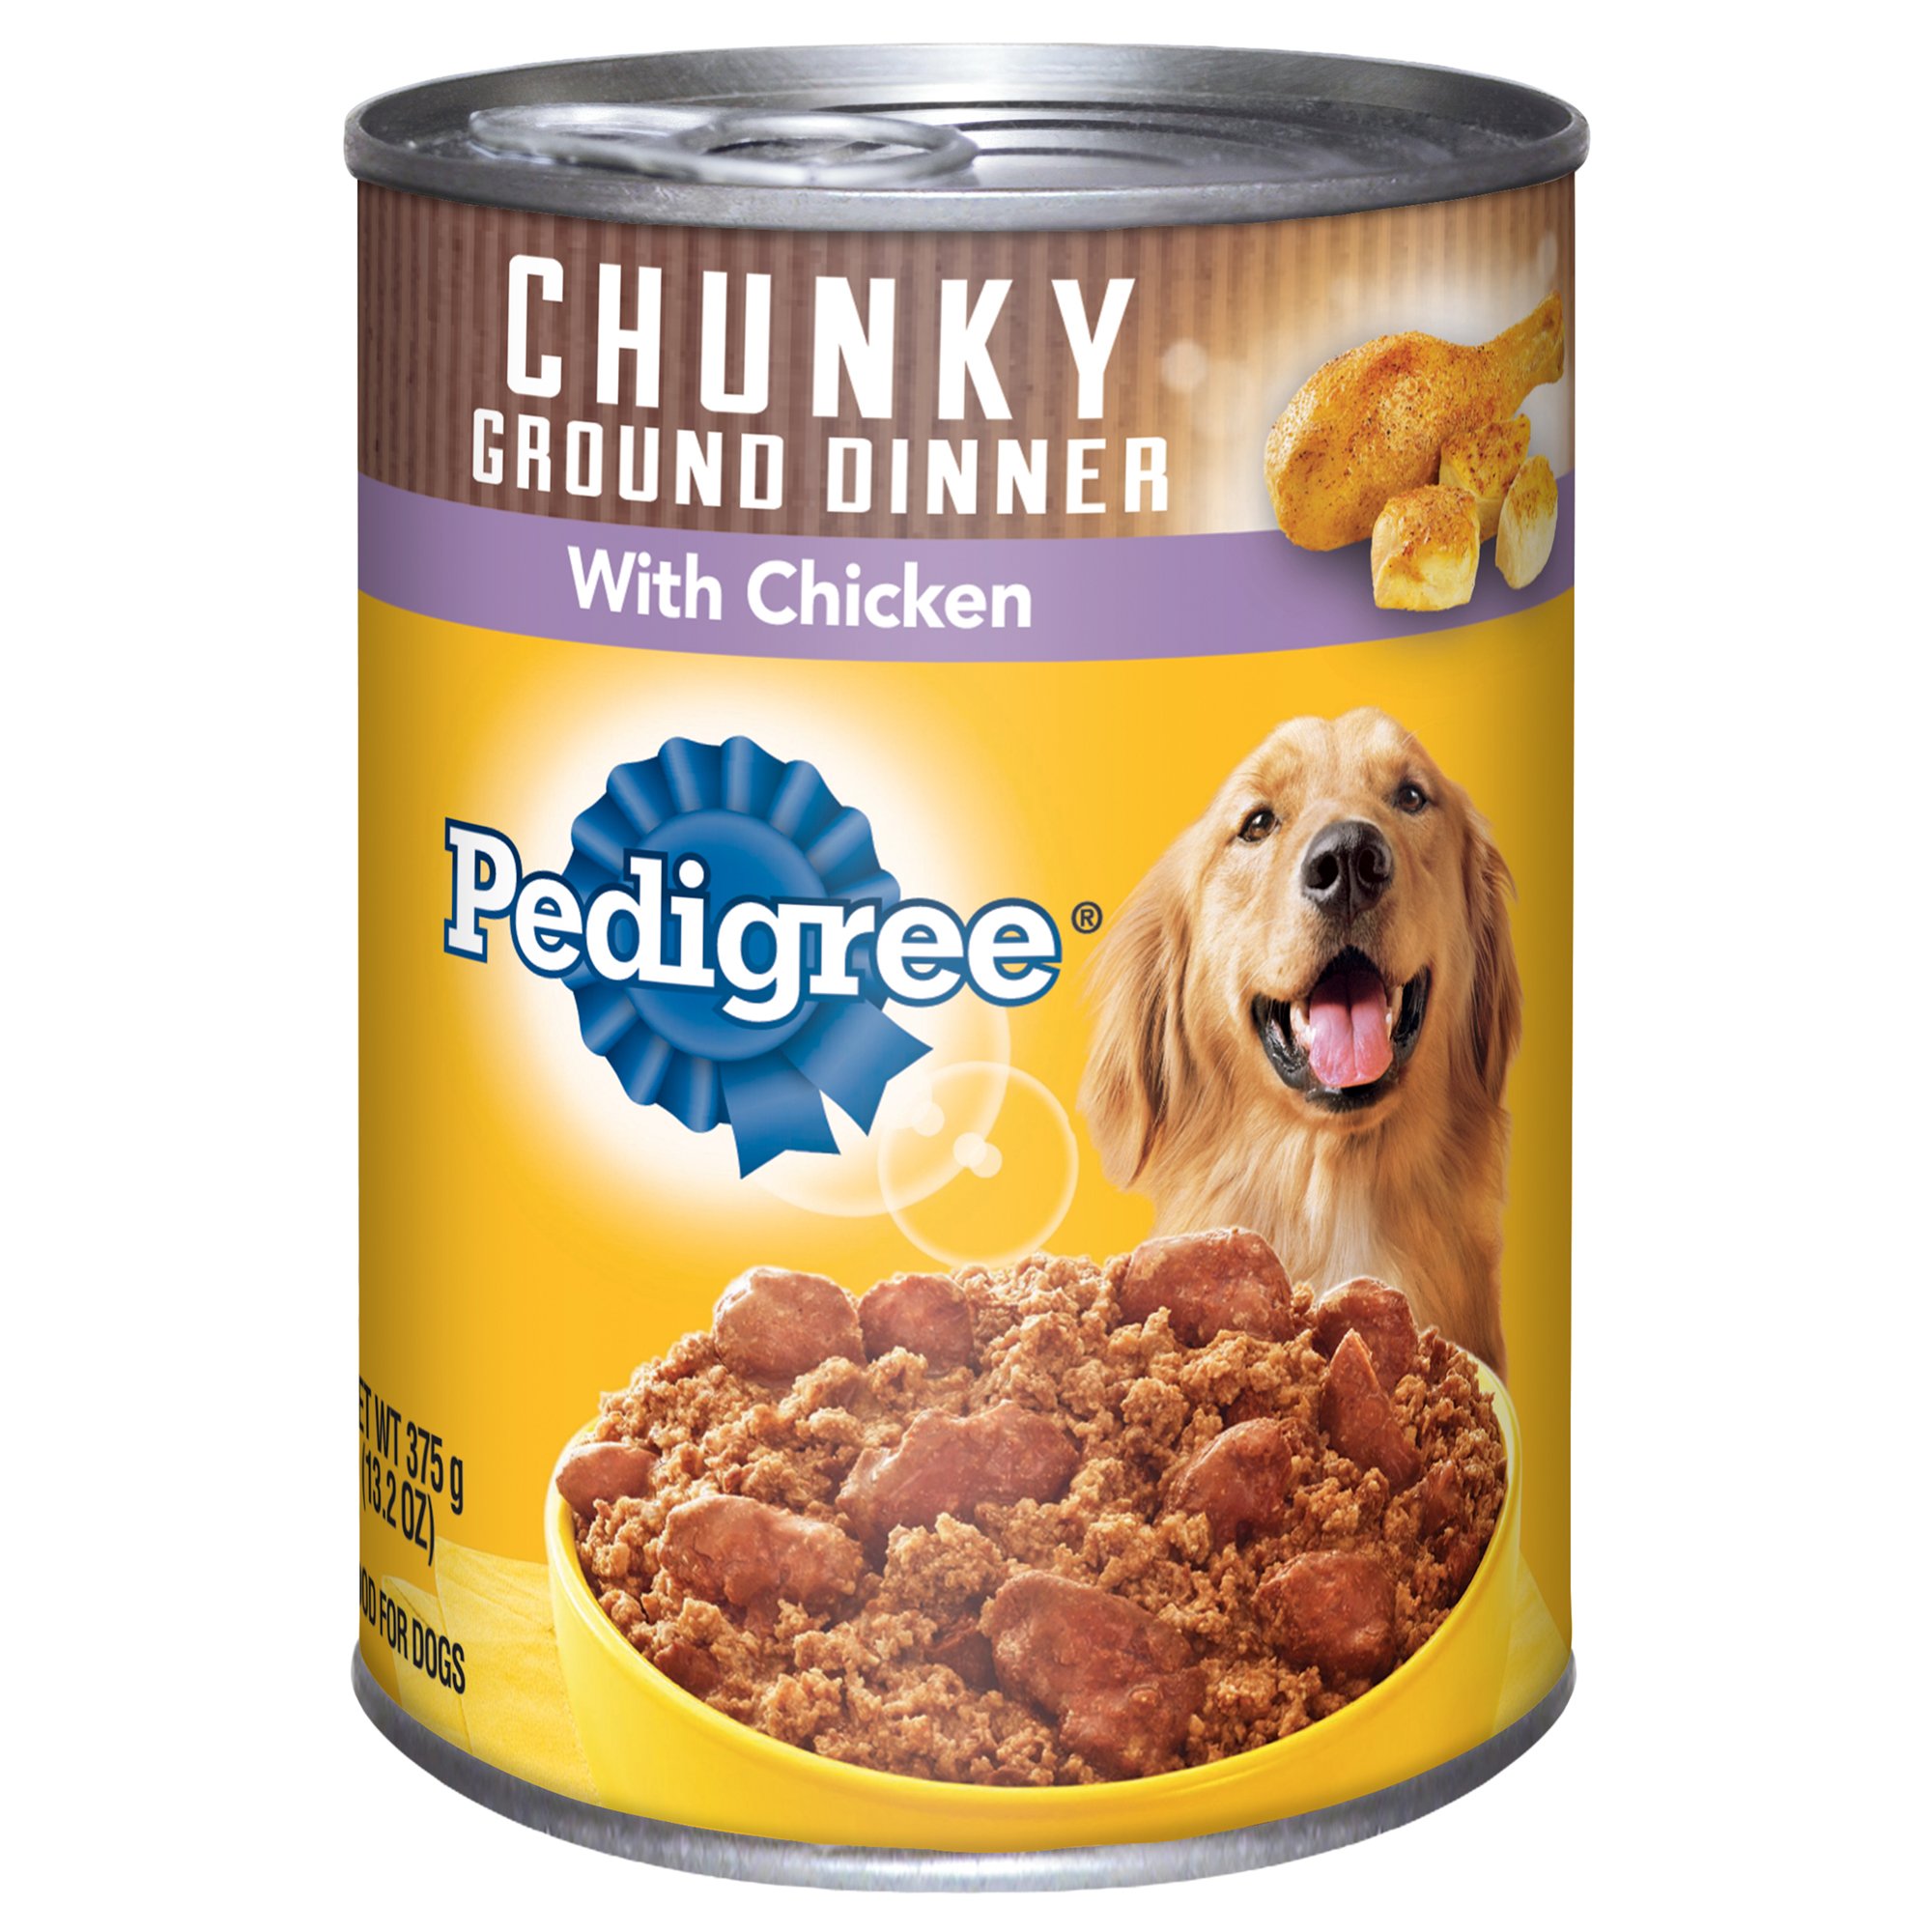 Pedigree Chunky Ground Dinner With Chicken Canned Dog Food ...